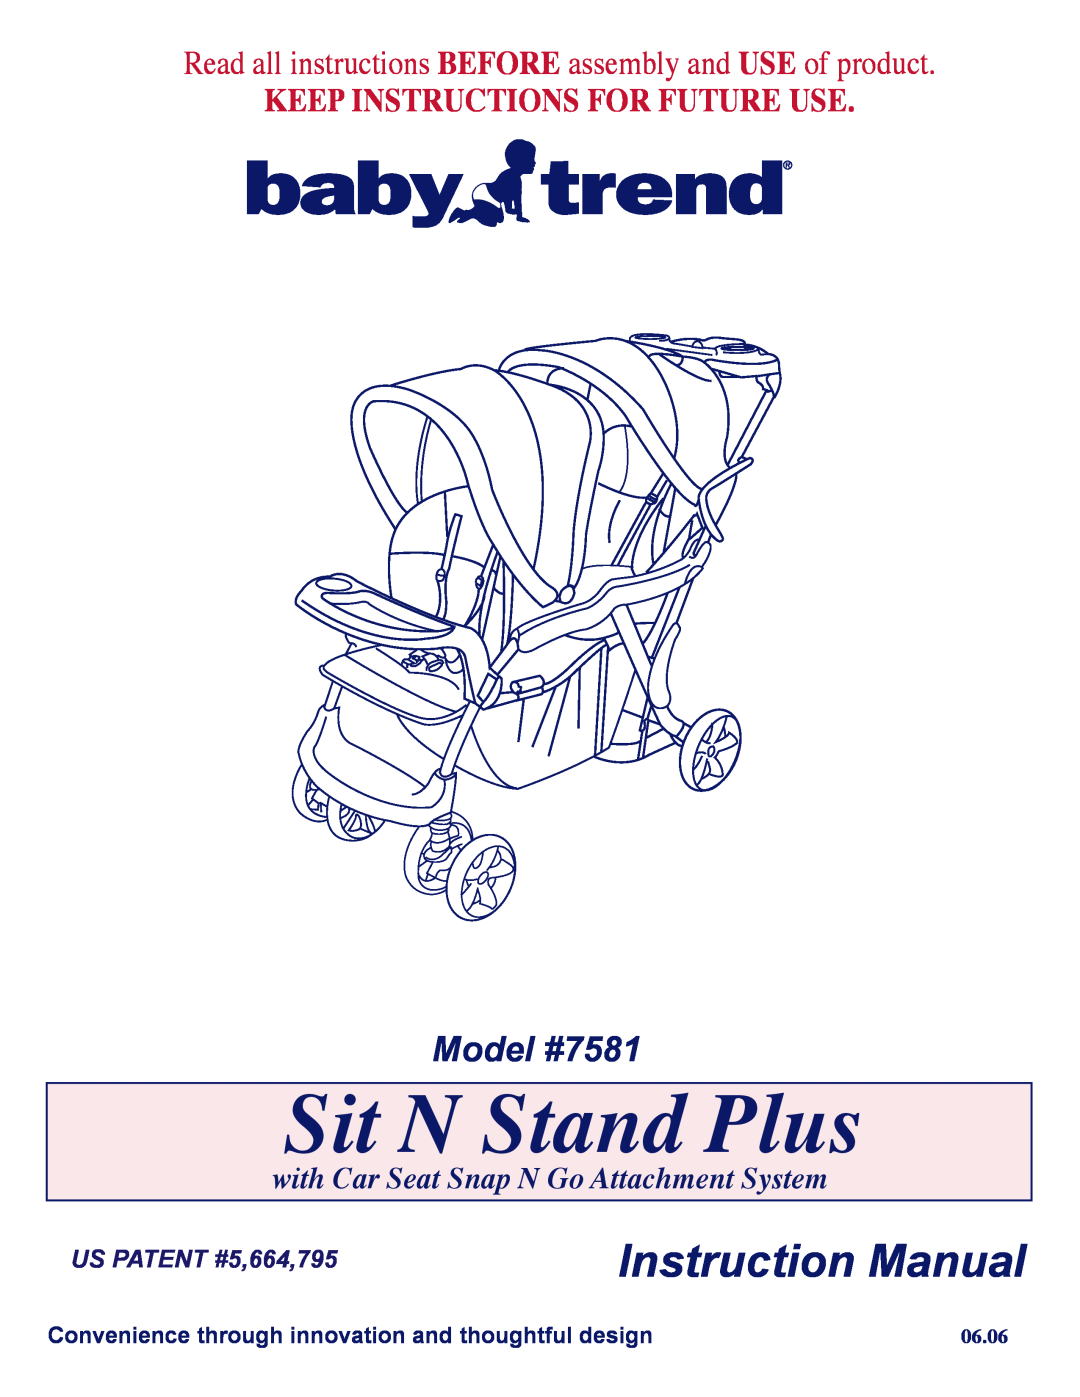 Baby Trend manual 06.06, Sit N Stand Plus, Instruction Manual, Model #7581, Keep Instructions For Future Use 